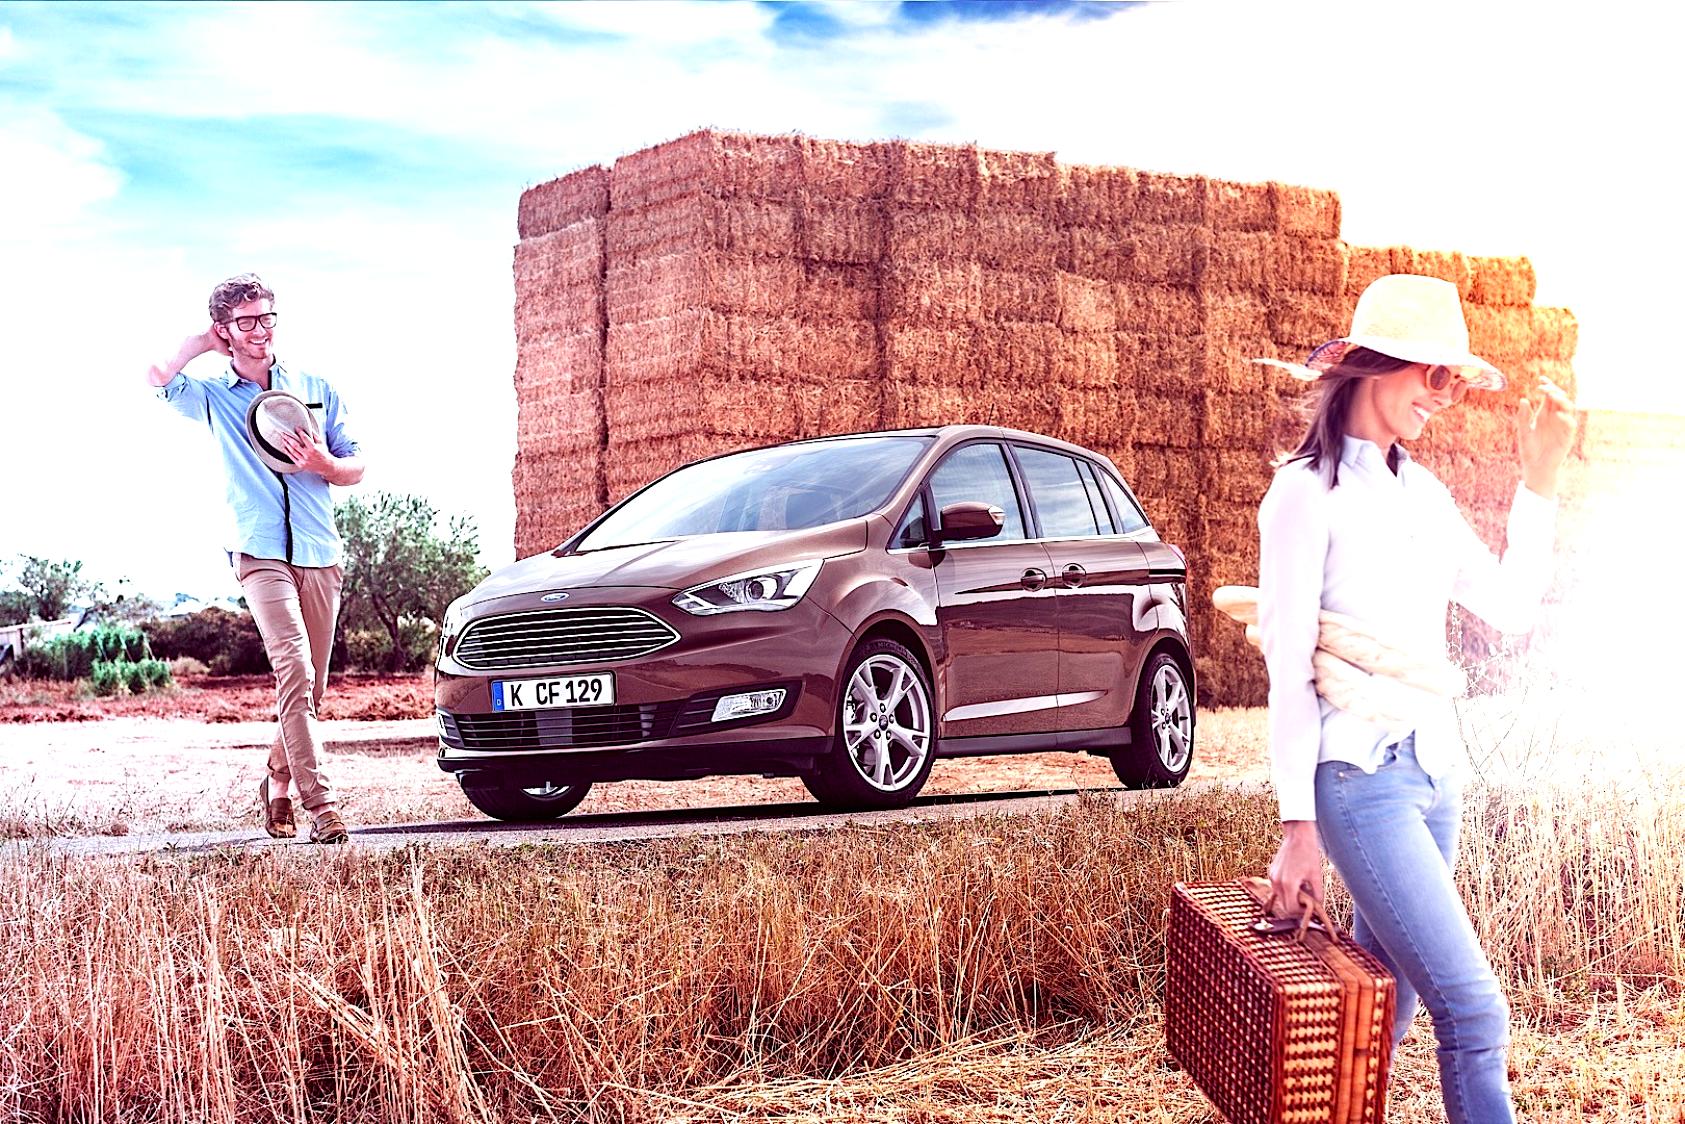 Ford C-Max 2014 #57